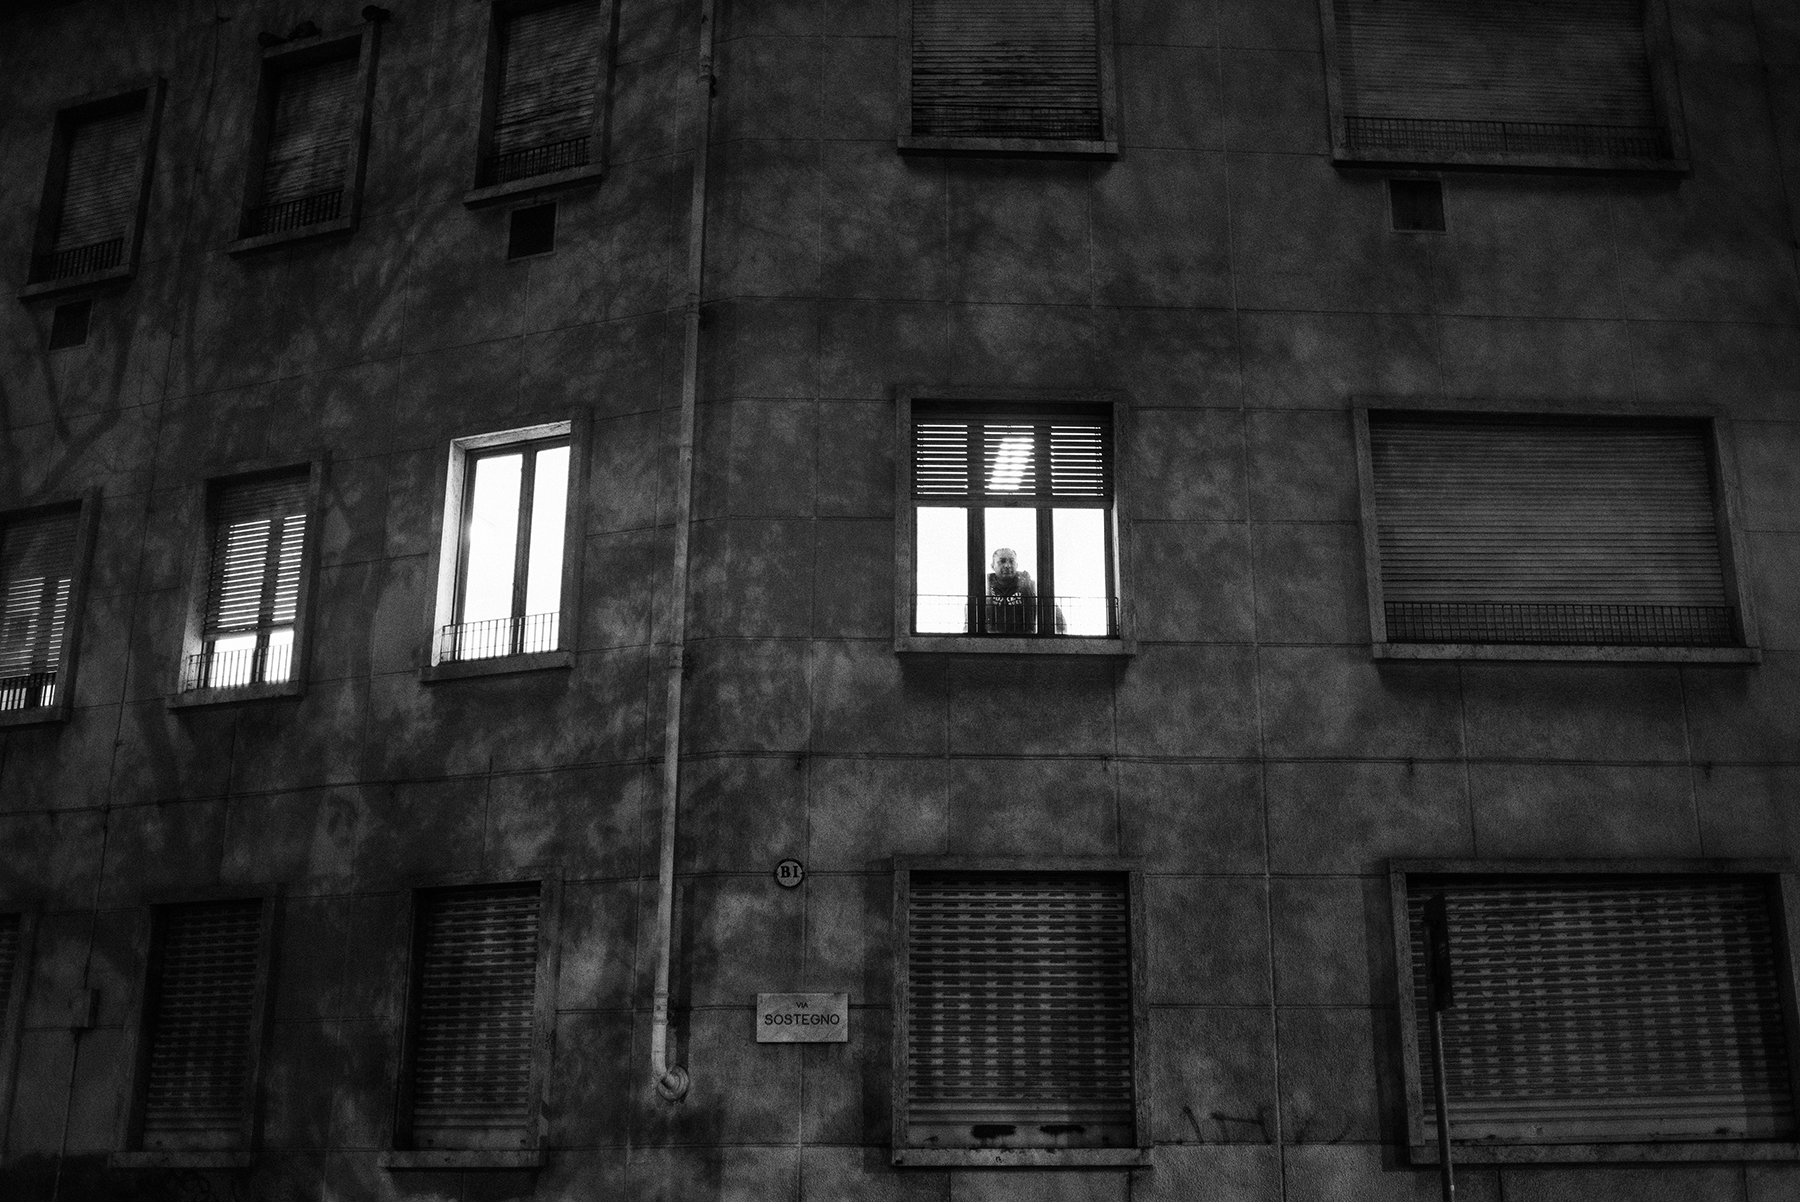  Gurpreet Dhindsa (38) looks out the window from the Red Cross dormitory in Piazza Massaua in Turin, Italy; December 2018.
After being kicked out, Mr. Dhindsa passed the following nights on the waiting room of a near hospital and he is now forced to 